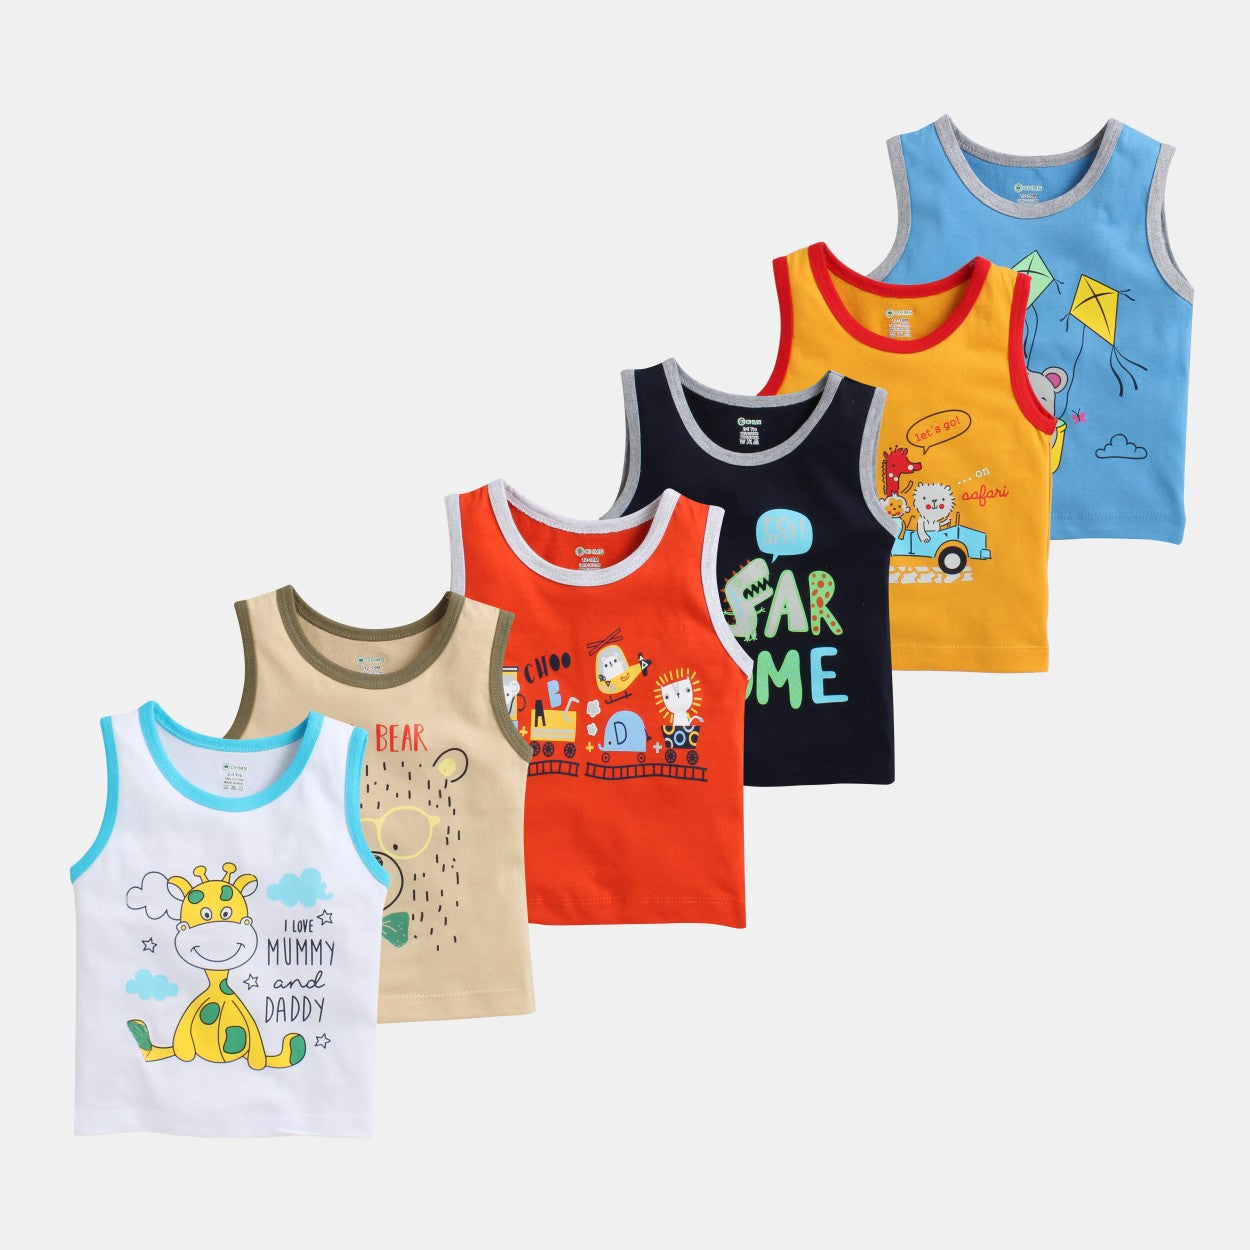 Boys Casual tops  sleeveless Vests Pack of 6